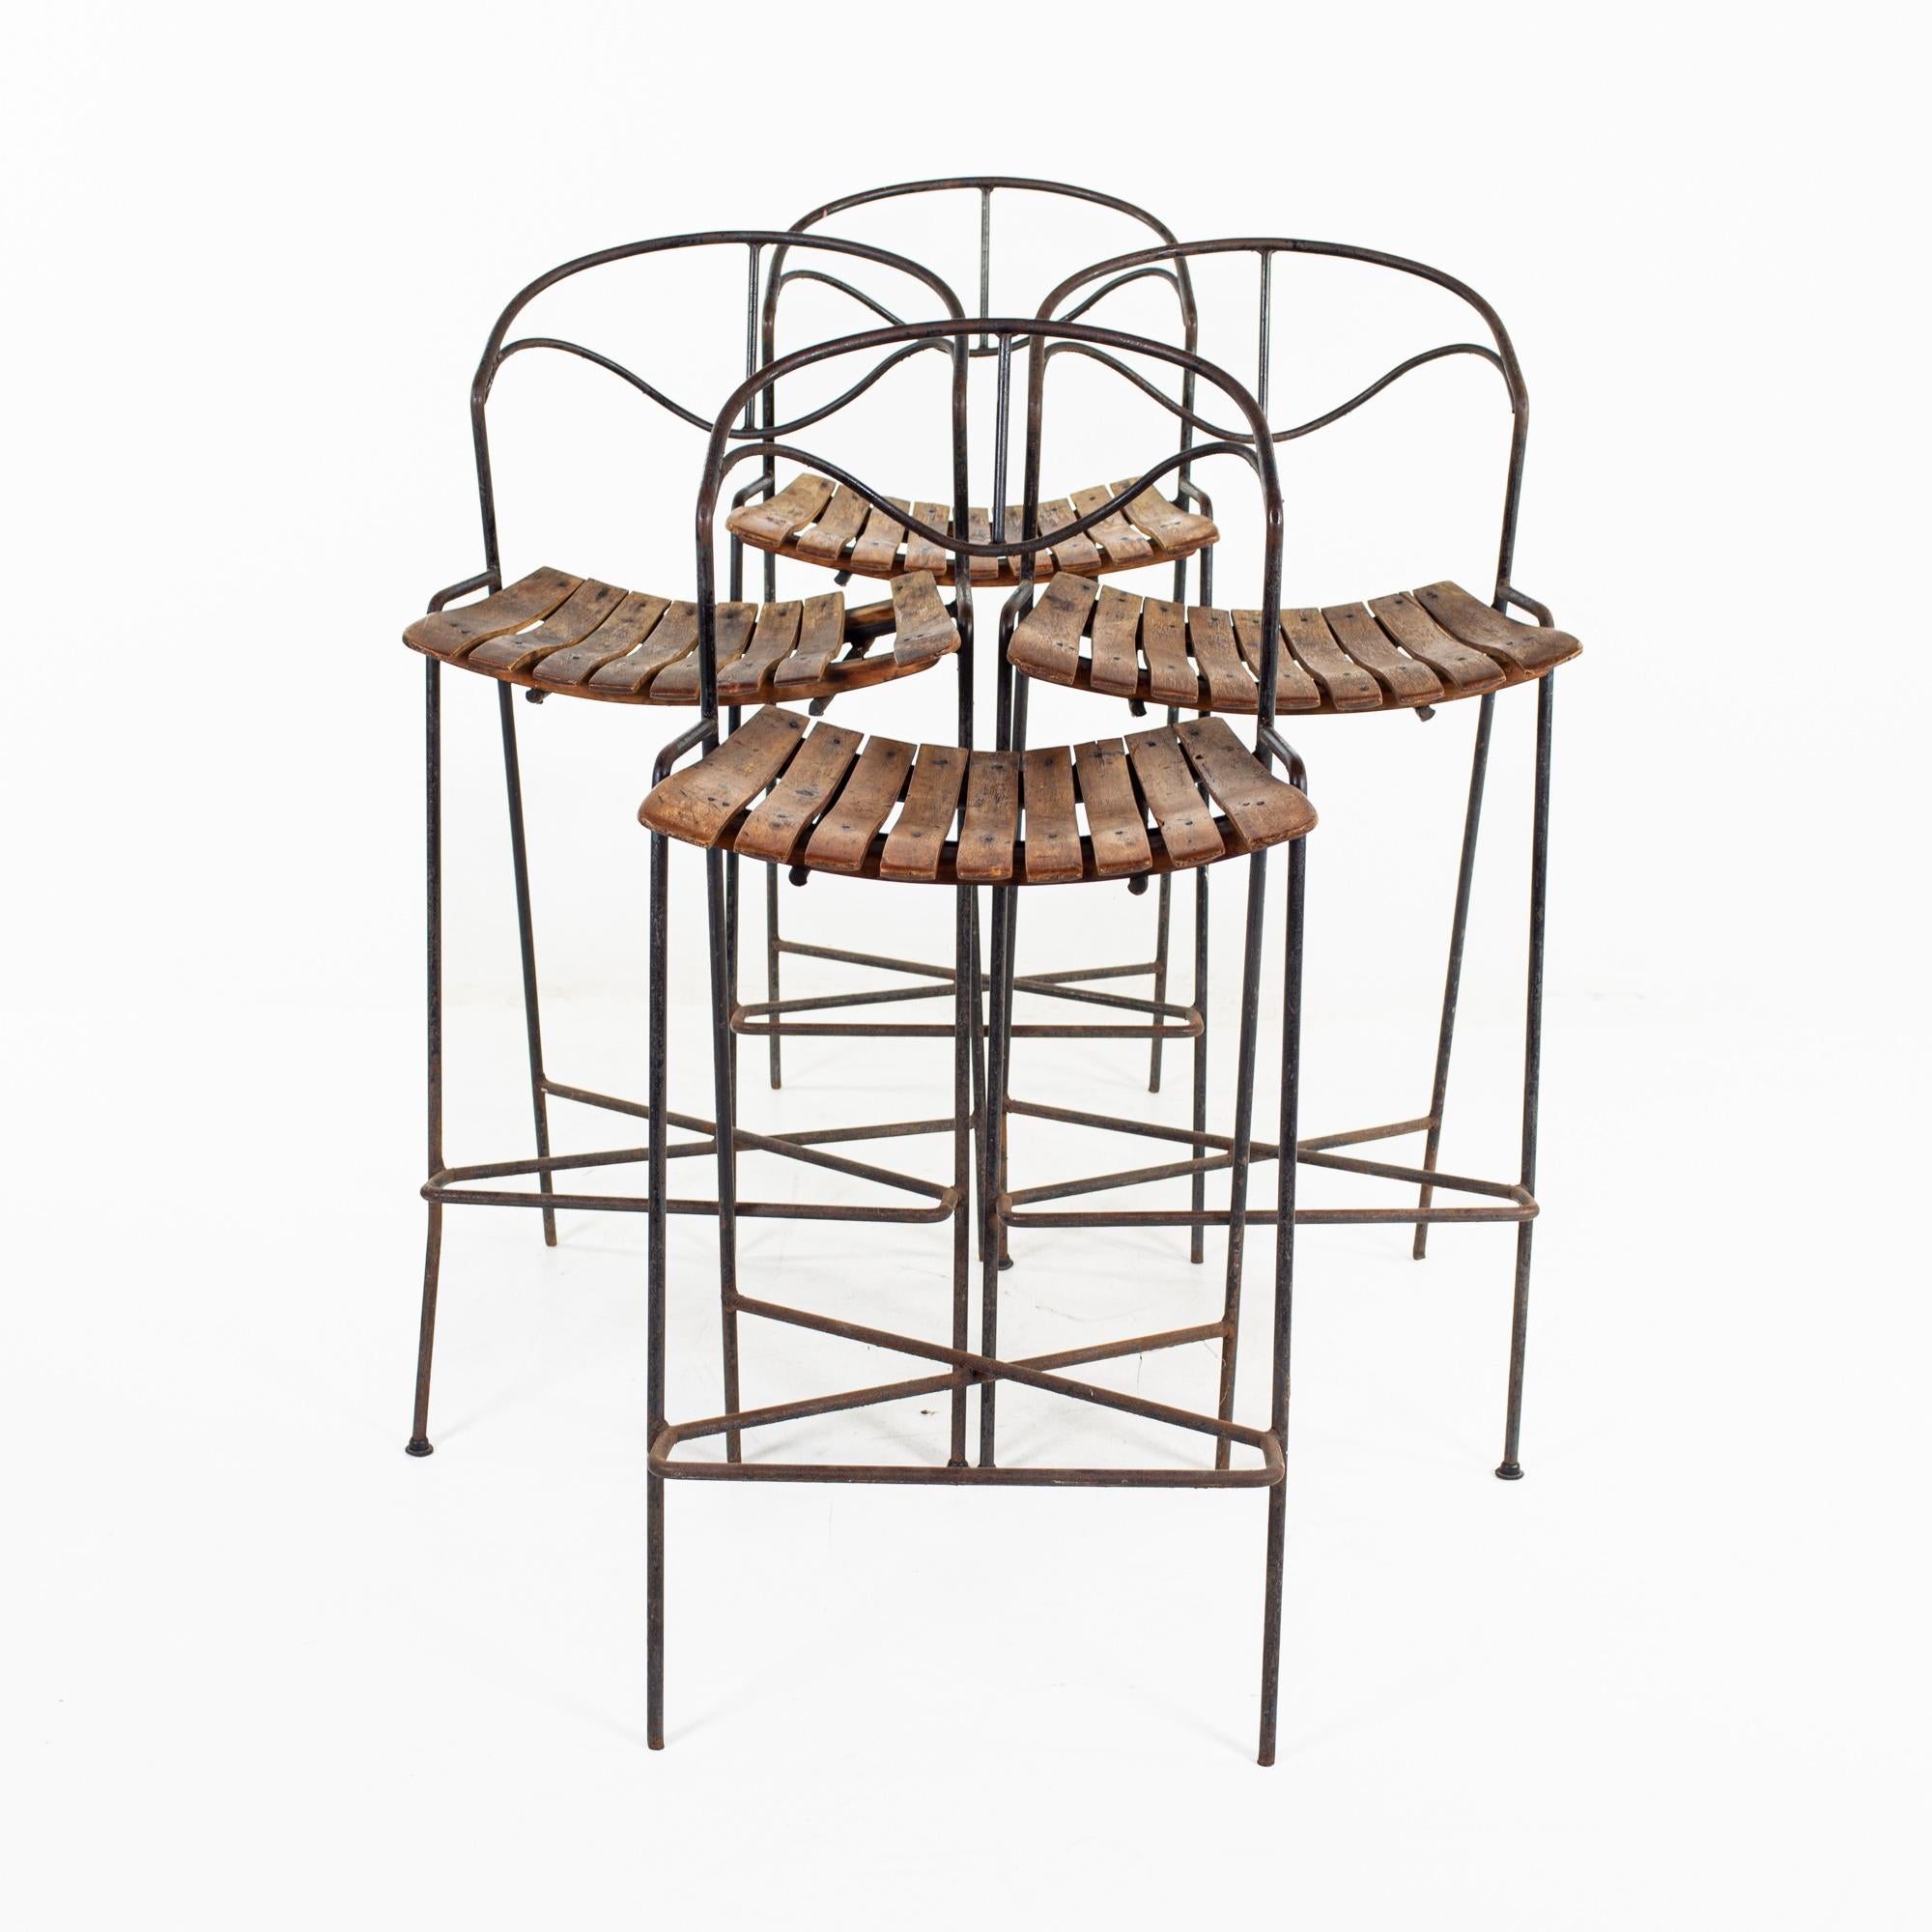 Arthur Umanoff for Raymor mid century iron and wood barstools - set of 4

This chair measure: 18 wide x 17 deep x 39 inches high, with a seat height/chair clearance of 28 inches

All pieces of furniture can be had in what we call restored